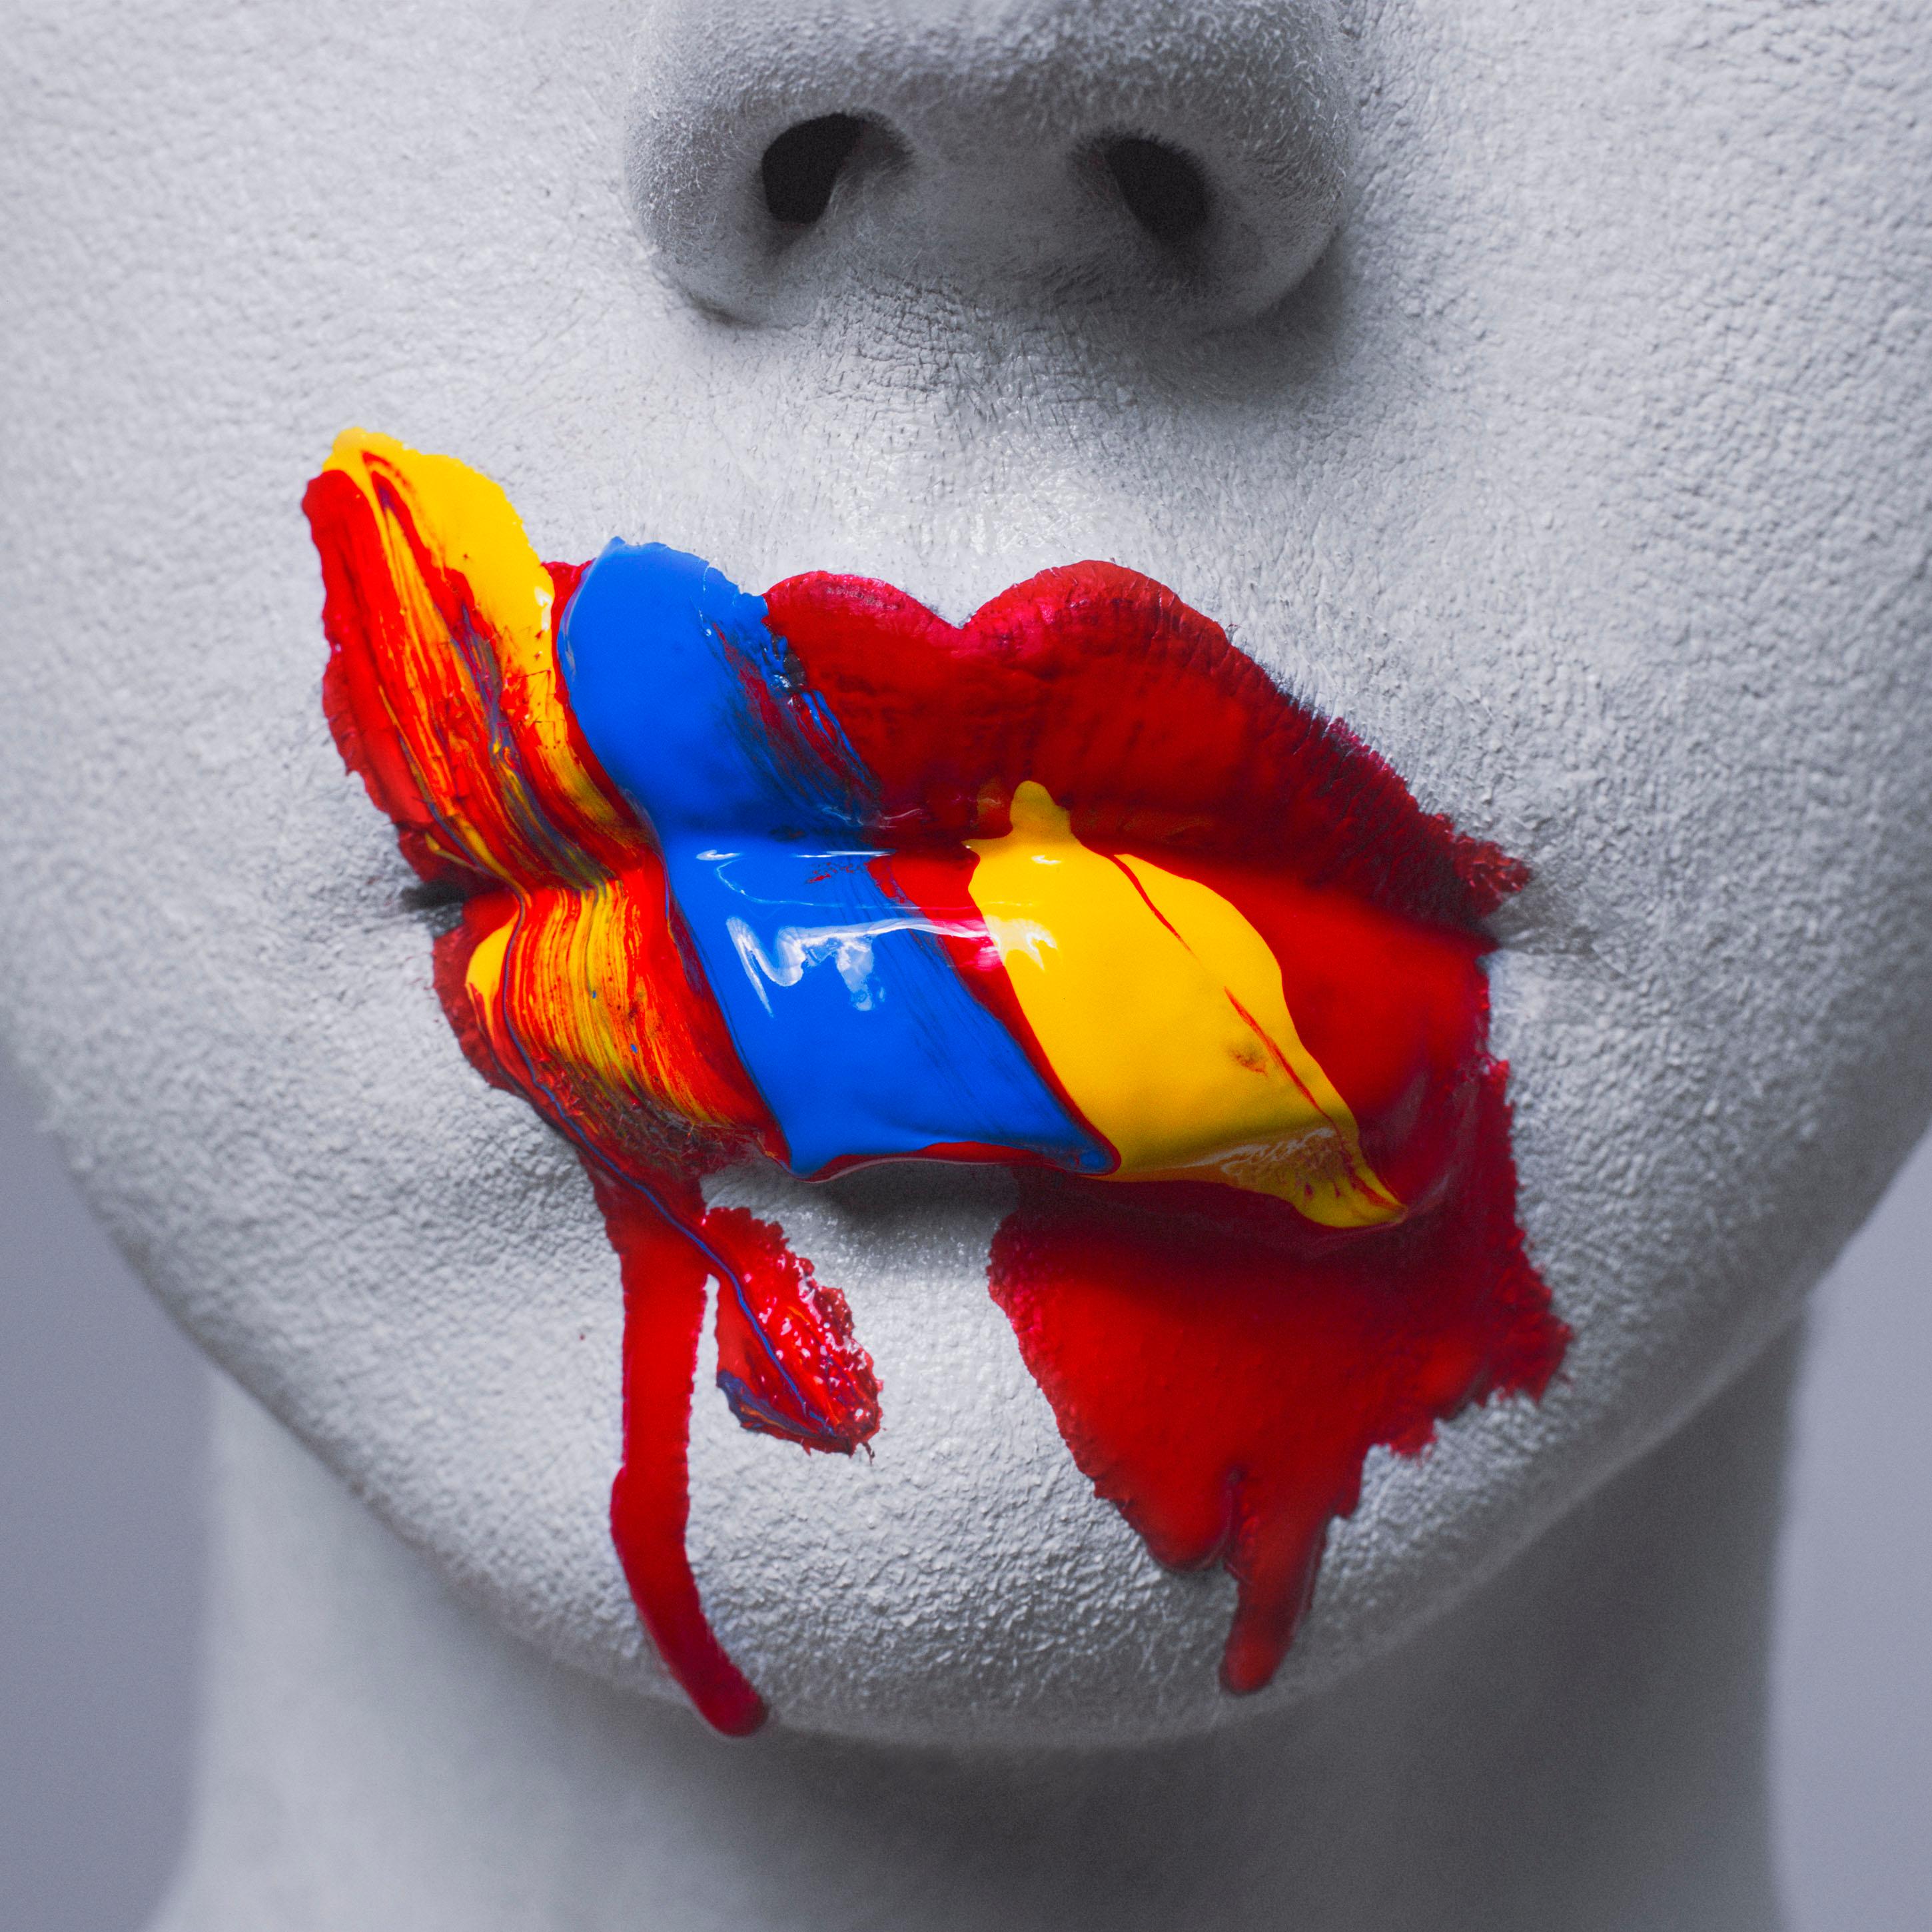 Tyler Shields, 'Primary Lips', 2019
Medium: C-type Photographic Print
Signature: Signed Certificate of Authenticity
Edition of 3
Framed
To the trade pricing
(Additional sizes may require additional handling time)
Contemporary Art Photography